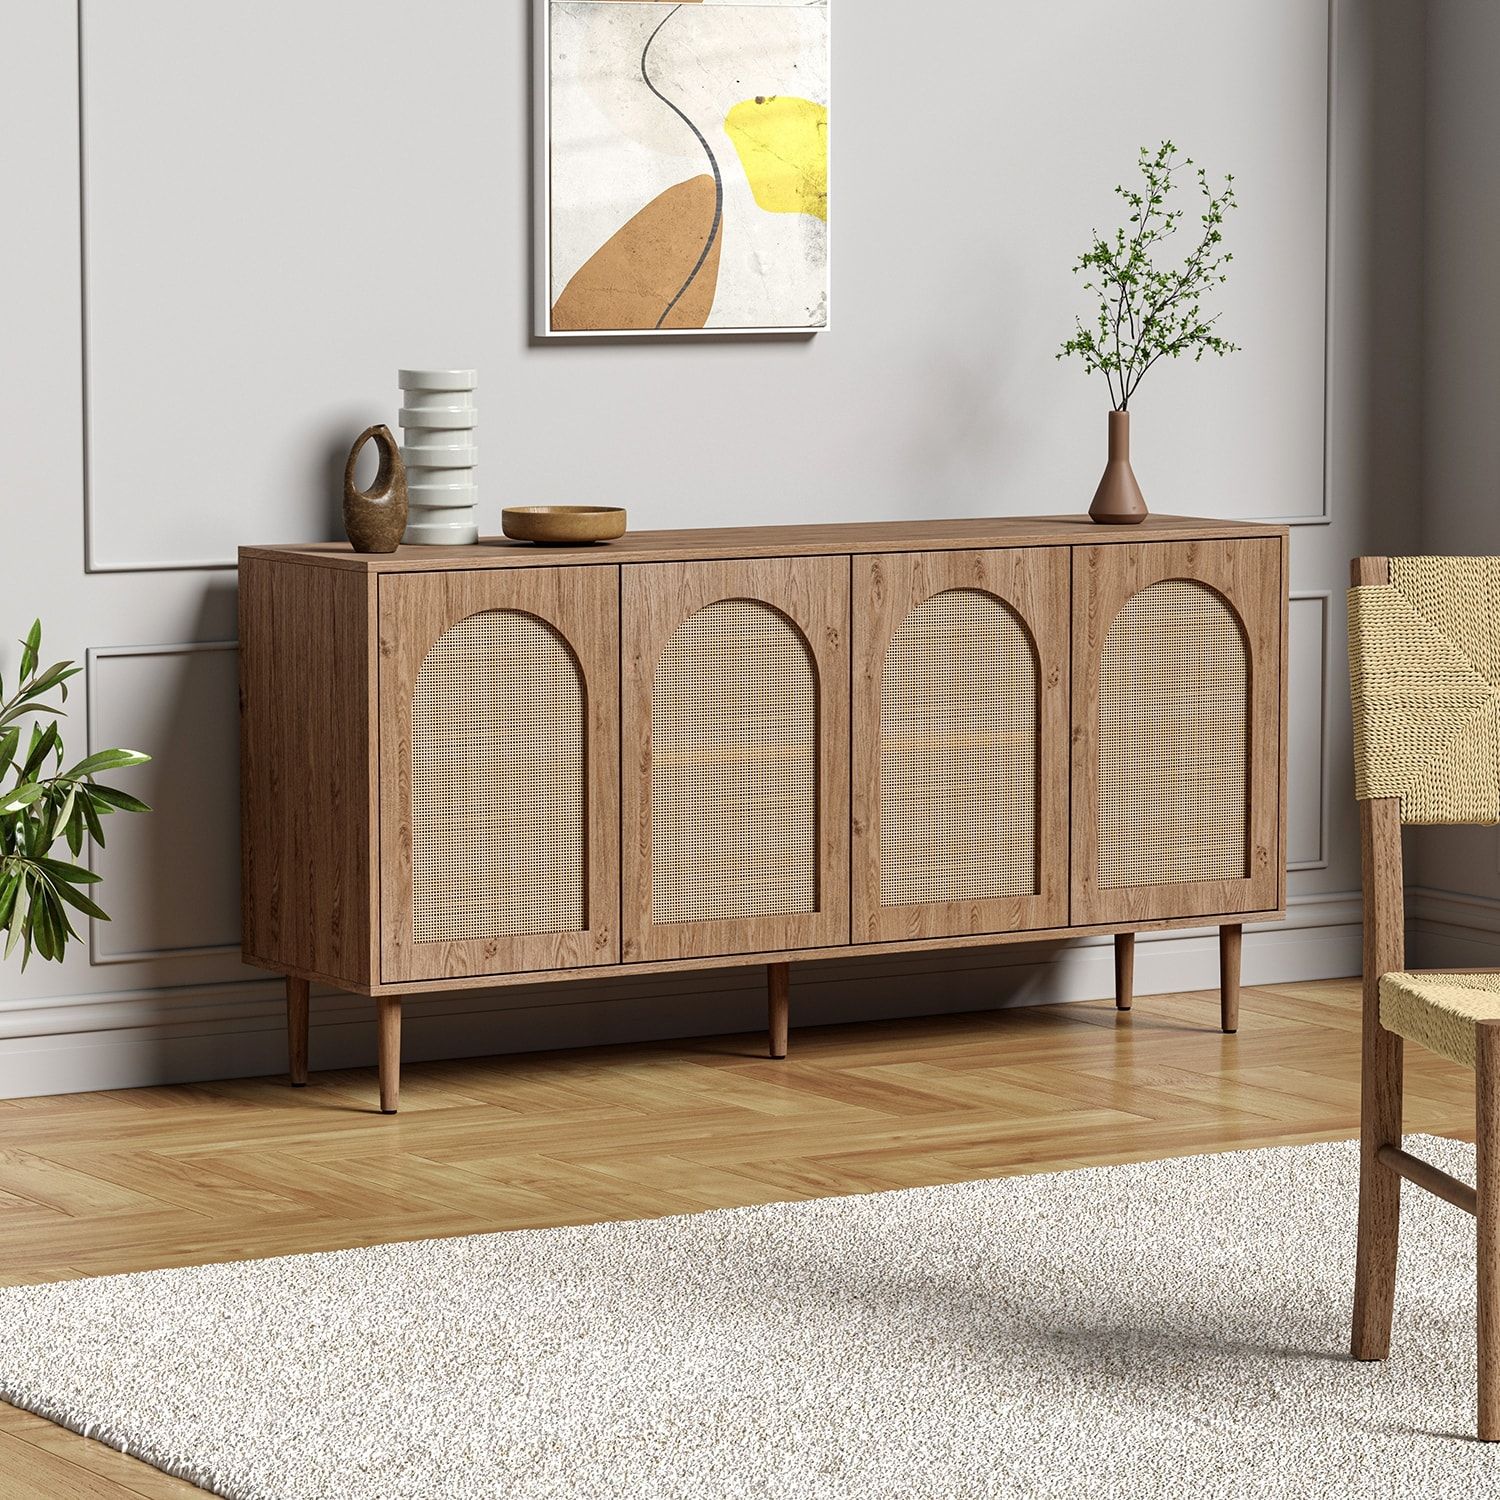 Uirico Multifunctional Buffet Sideboard Cabinet With Rattan Design Hulala Home – On Sale – Bed Bath & Beyond – 37218719 With Regard To Assembled Rattan Buffet Sideboards (Photo 12 of 15)